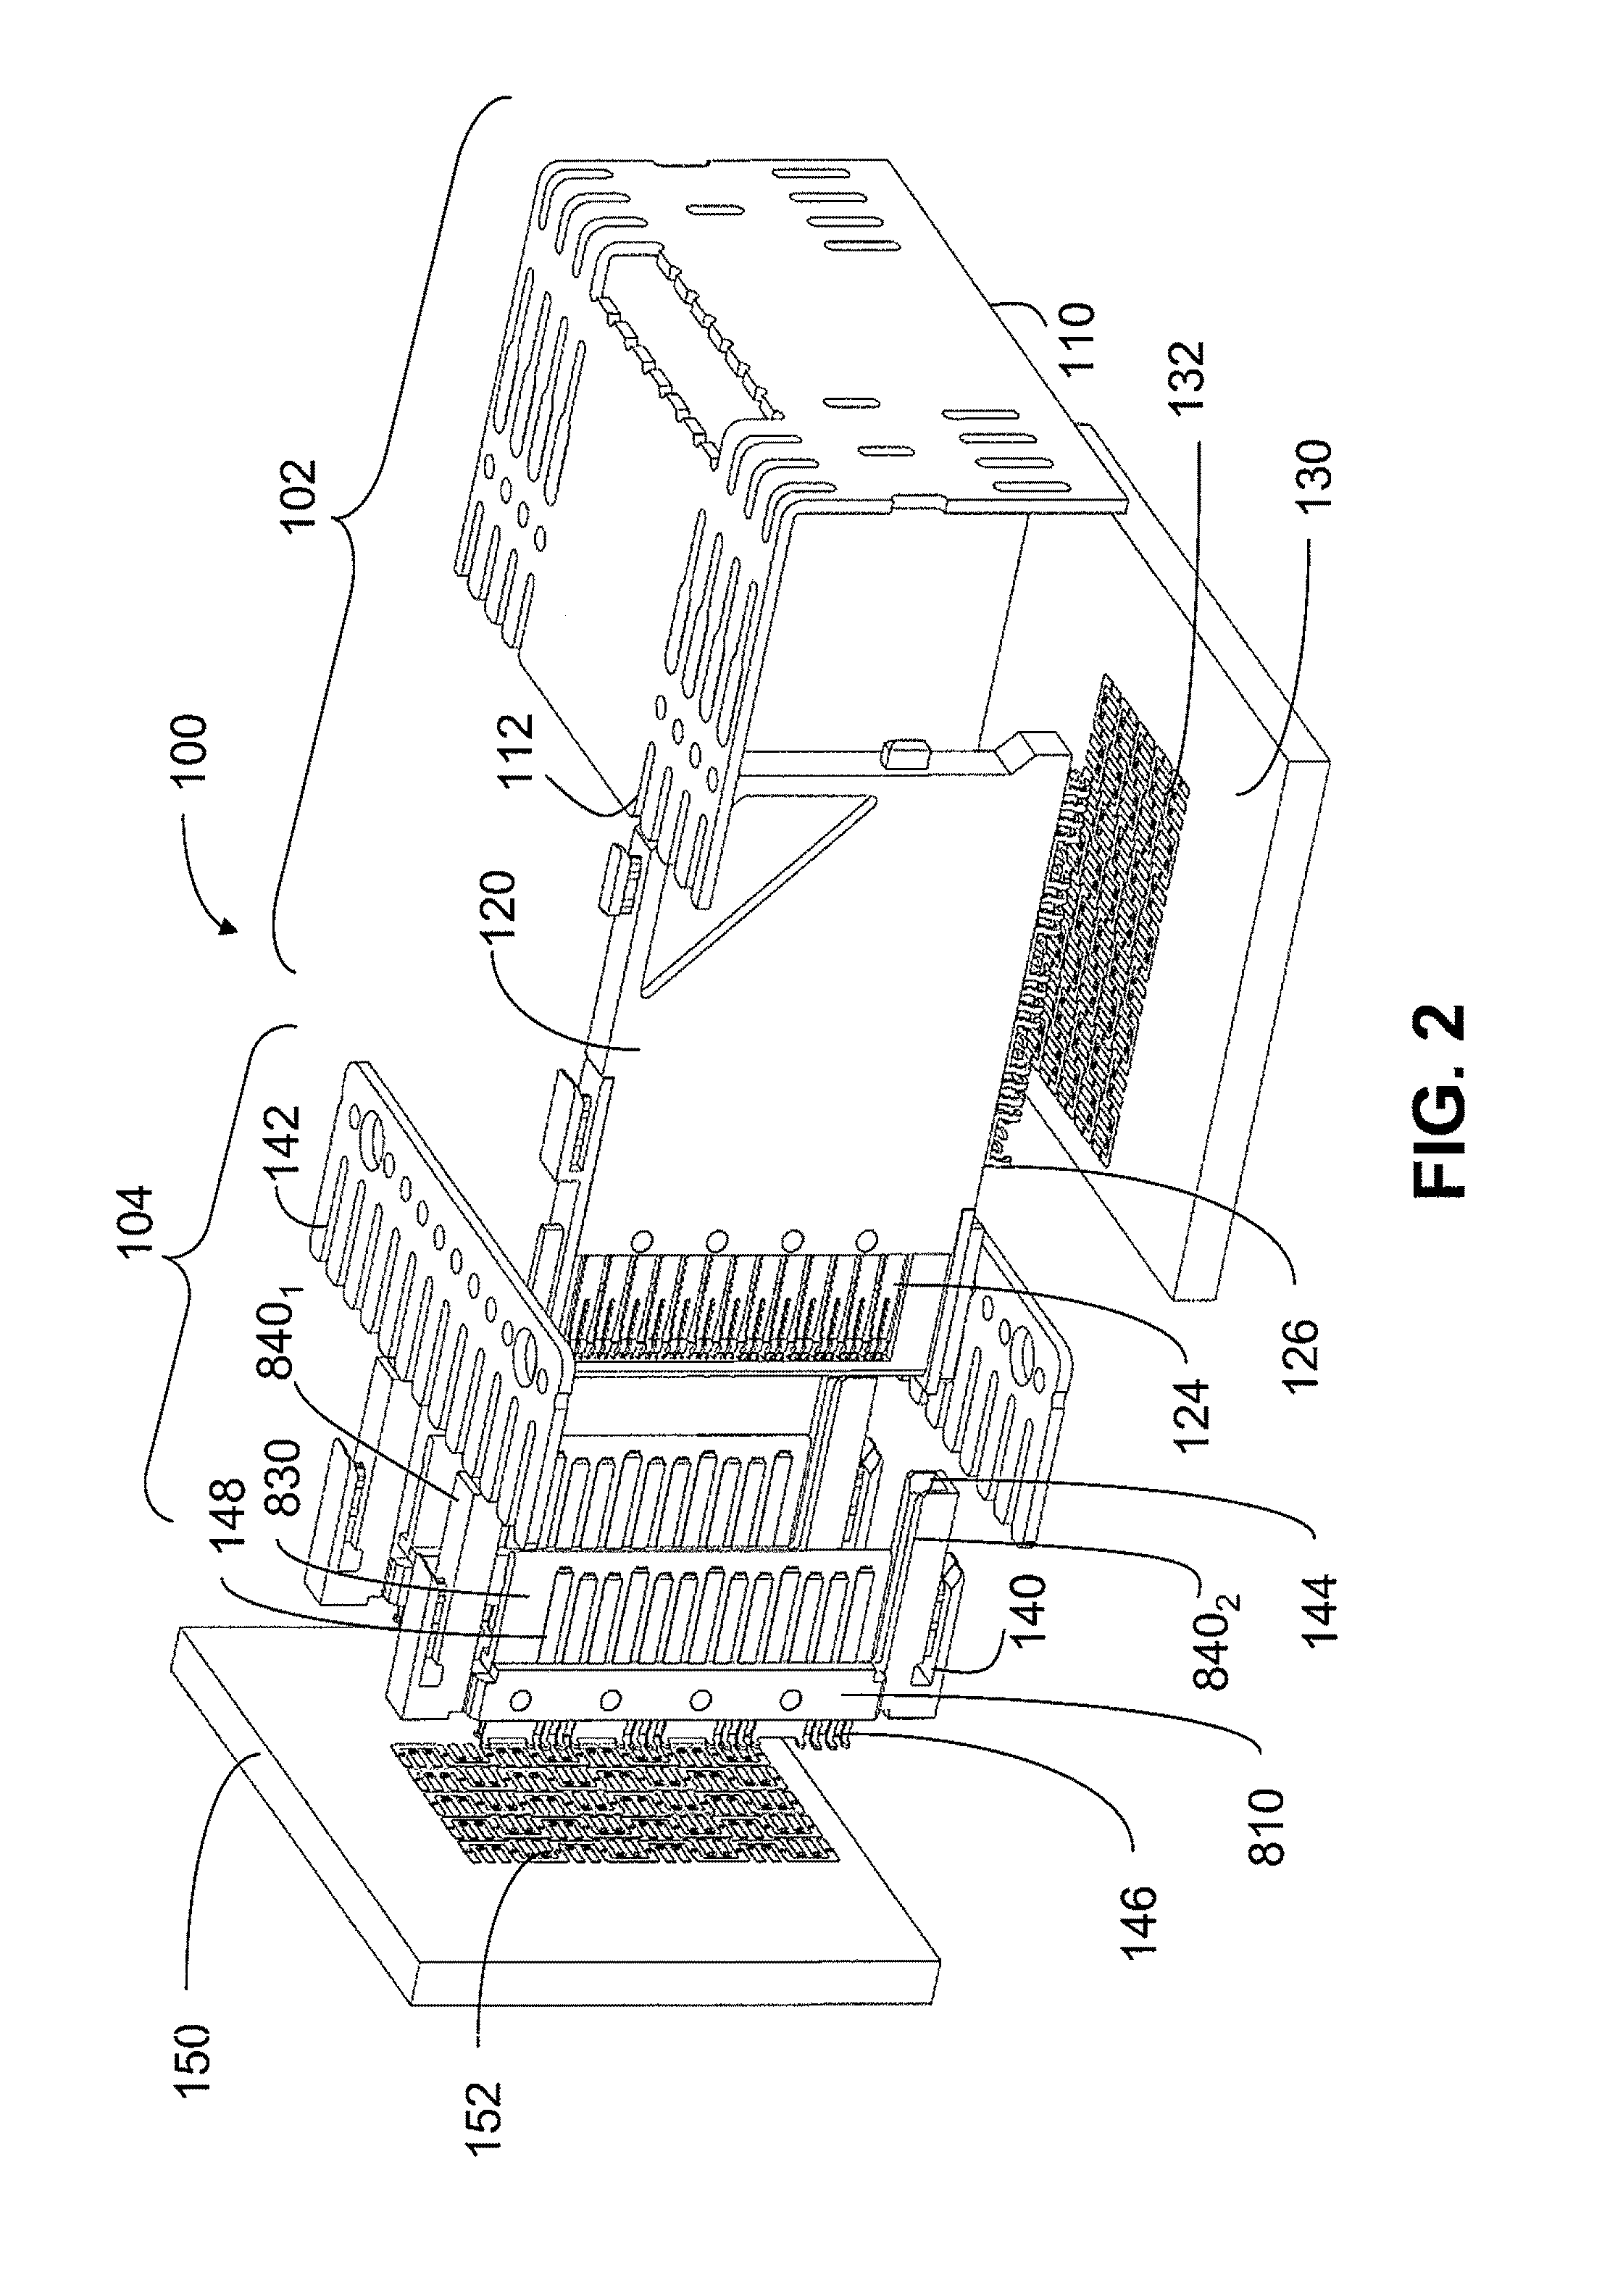 High density electrical connector with variable insertion and retention force